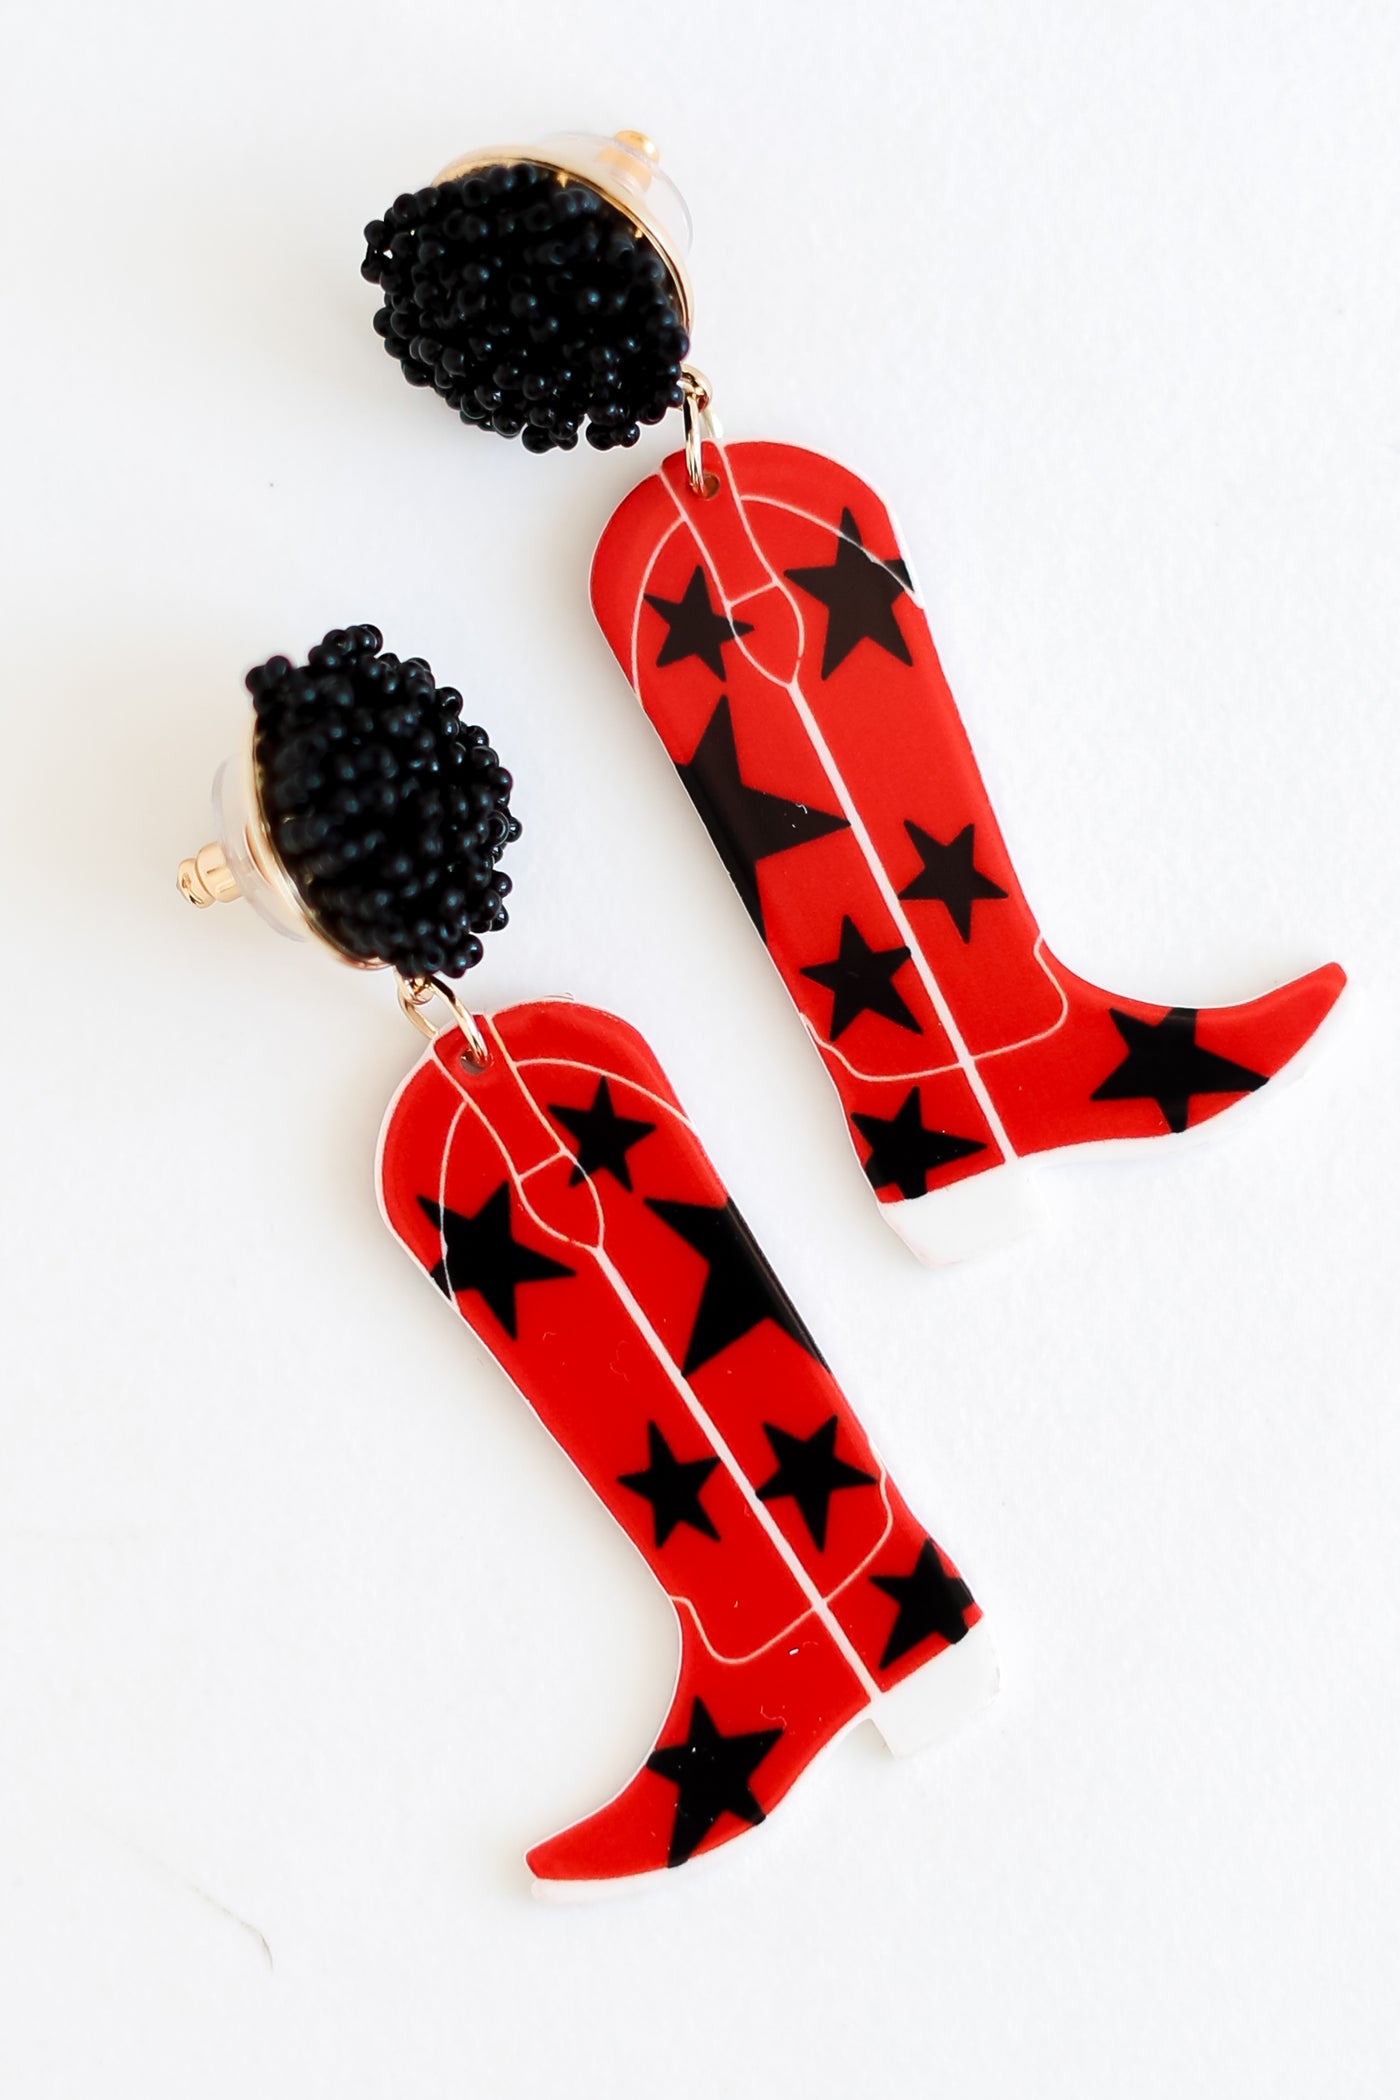 Red + Black Cowboy Boot Earrings for game day. Red + Black Cowboy Boot Earrings. Cute Earrings, UGA Earrings, Gameday Earrings, cowboy boots earrings